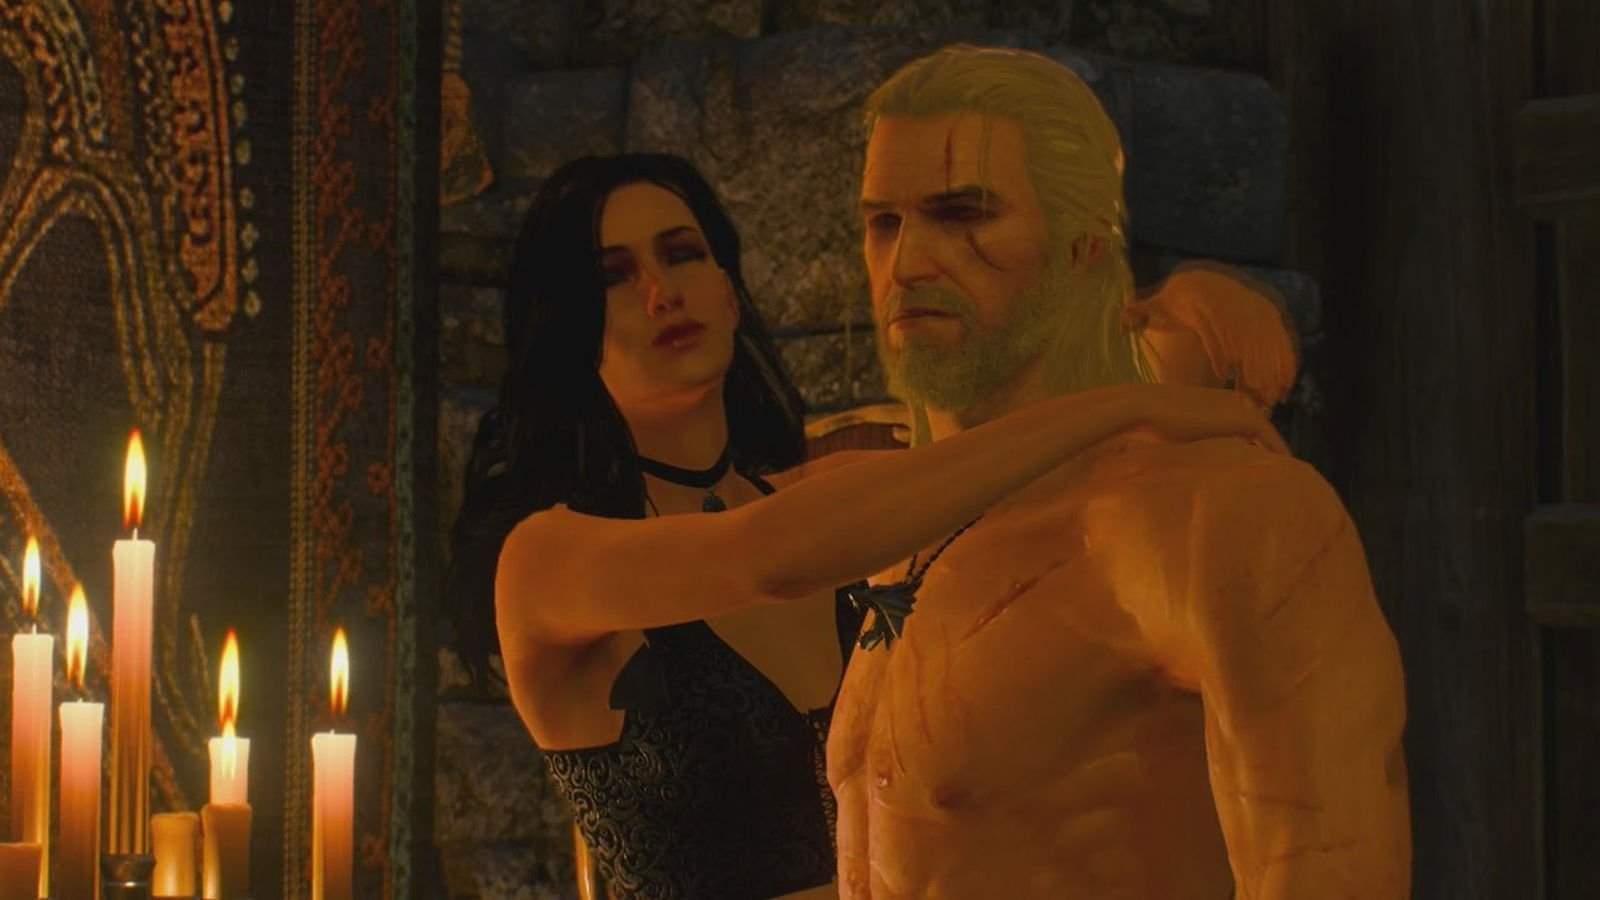 Vamers - FYI - Video Gaming - Geralt of Rivia voice actor says Witcher 3 sex scenes were awkward to record - 03